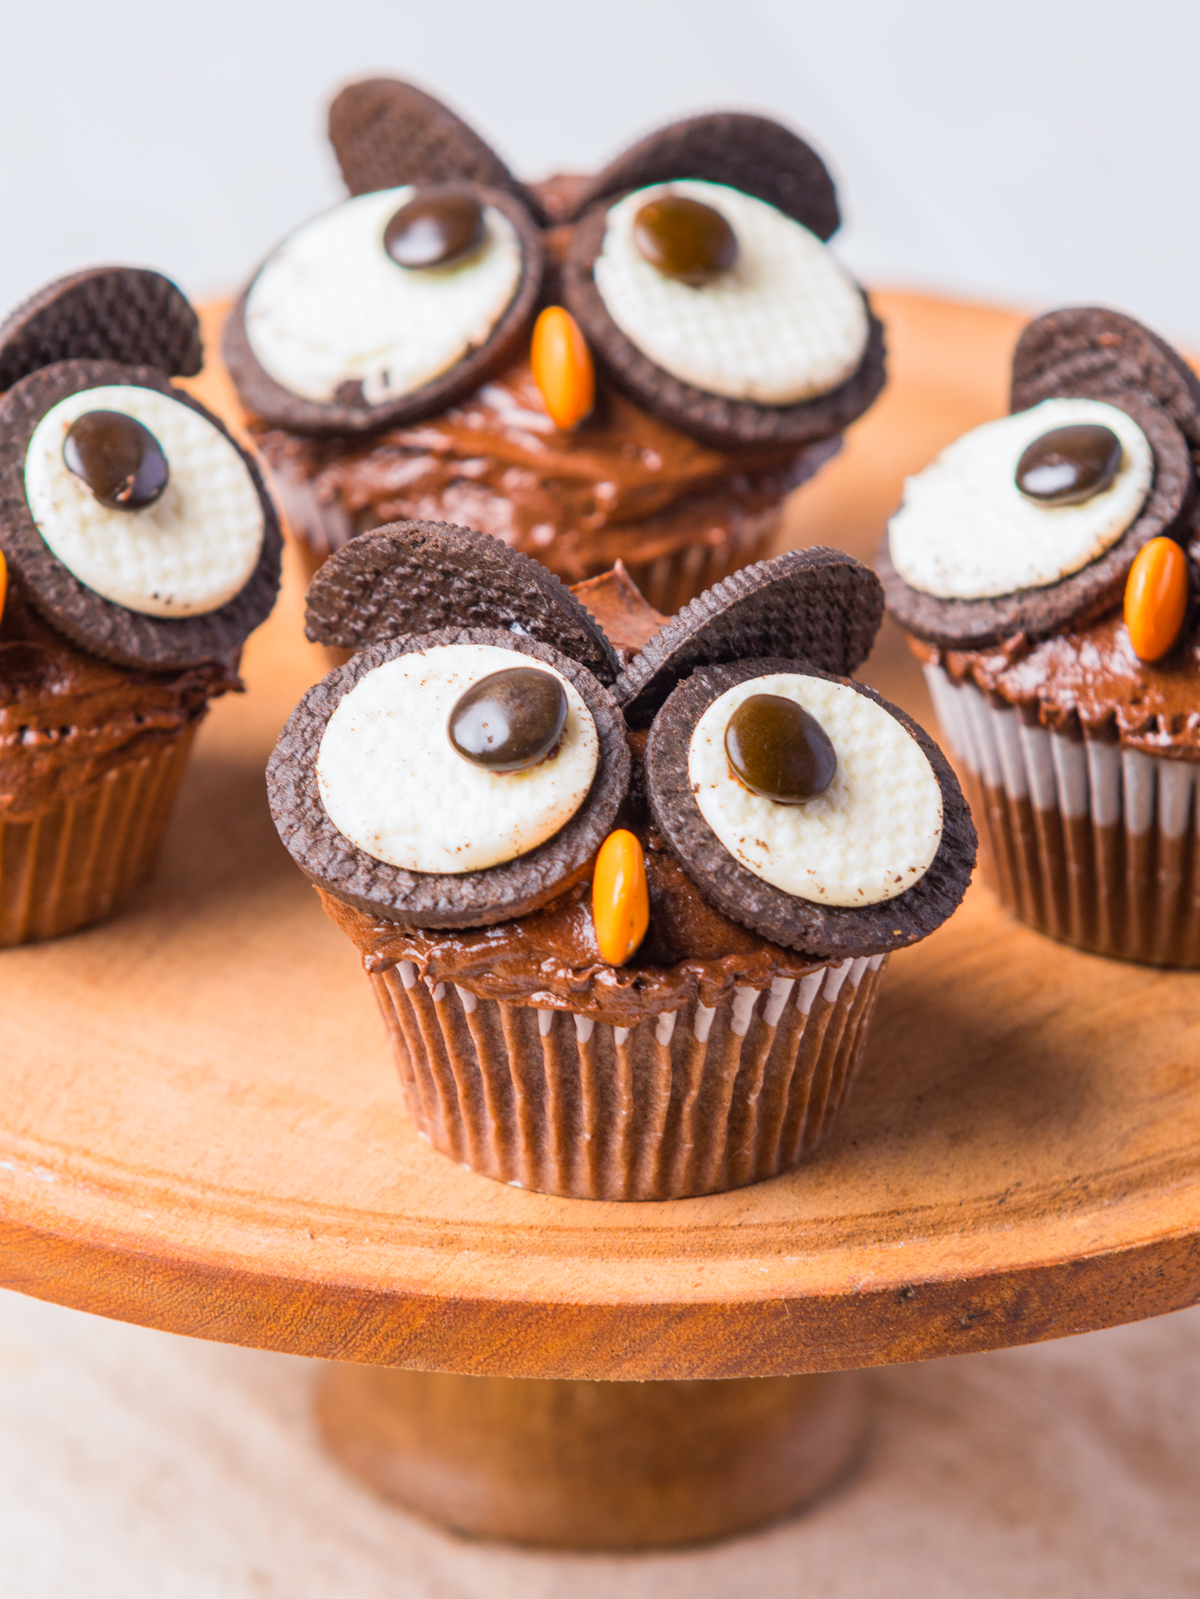 4 Owl Cupcakes on a wood cake stand.